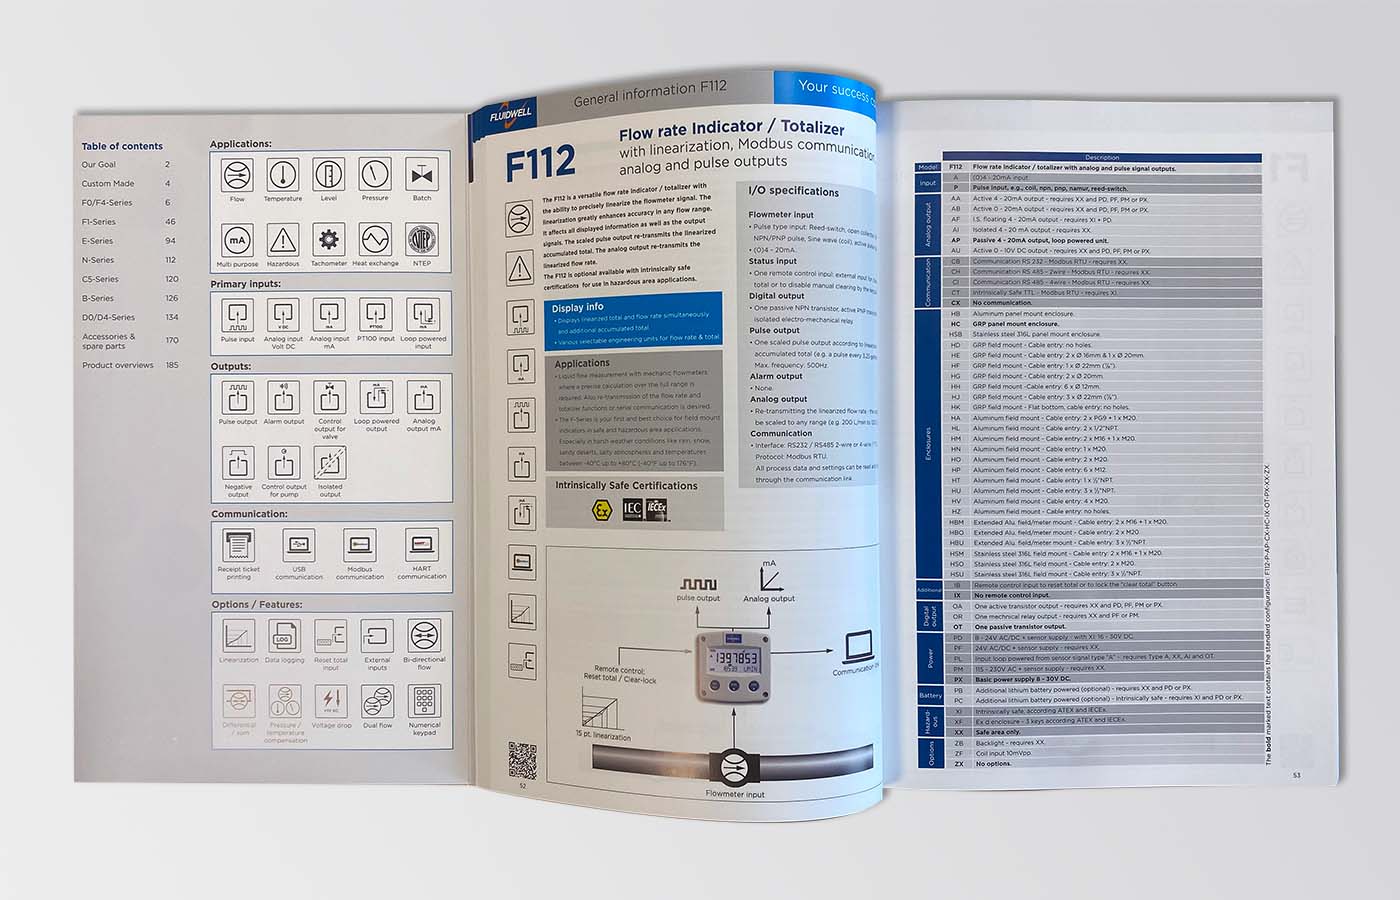 Catalog with Fold-out explanation of icons